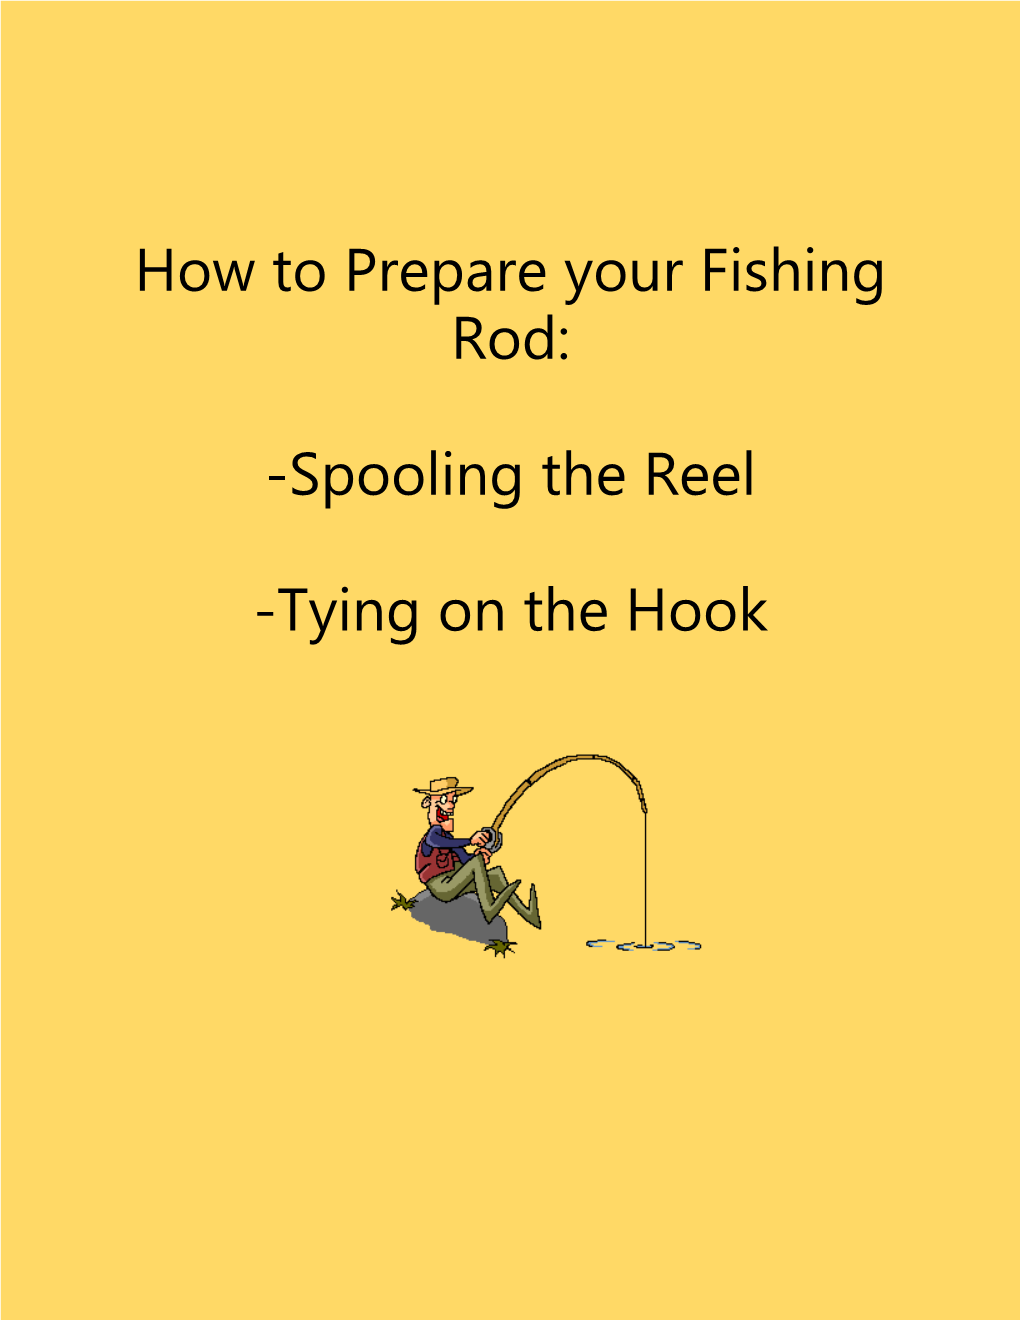 How to Prepare Your Fishing Rod: -Spooling the Reel -Tying on The